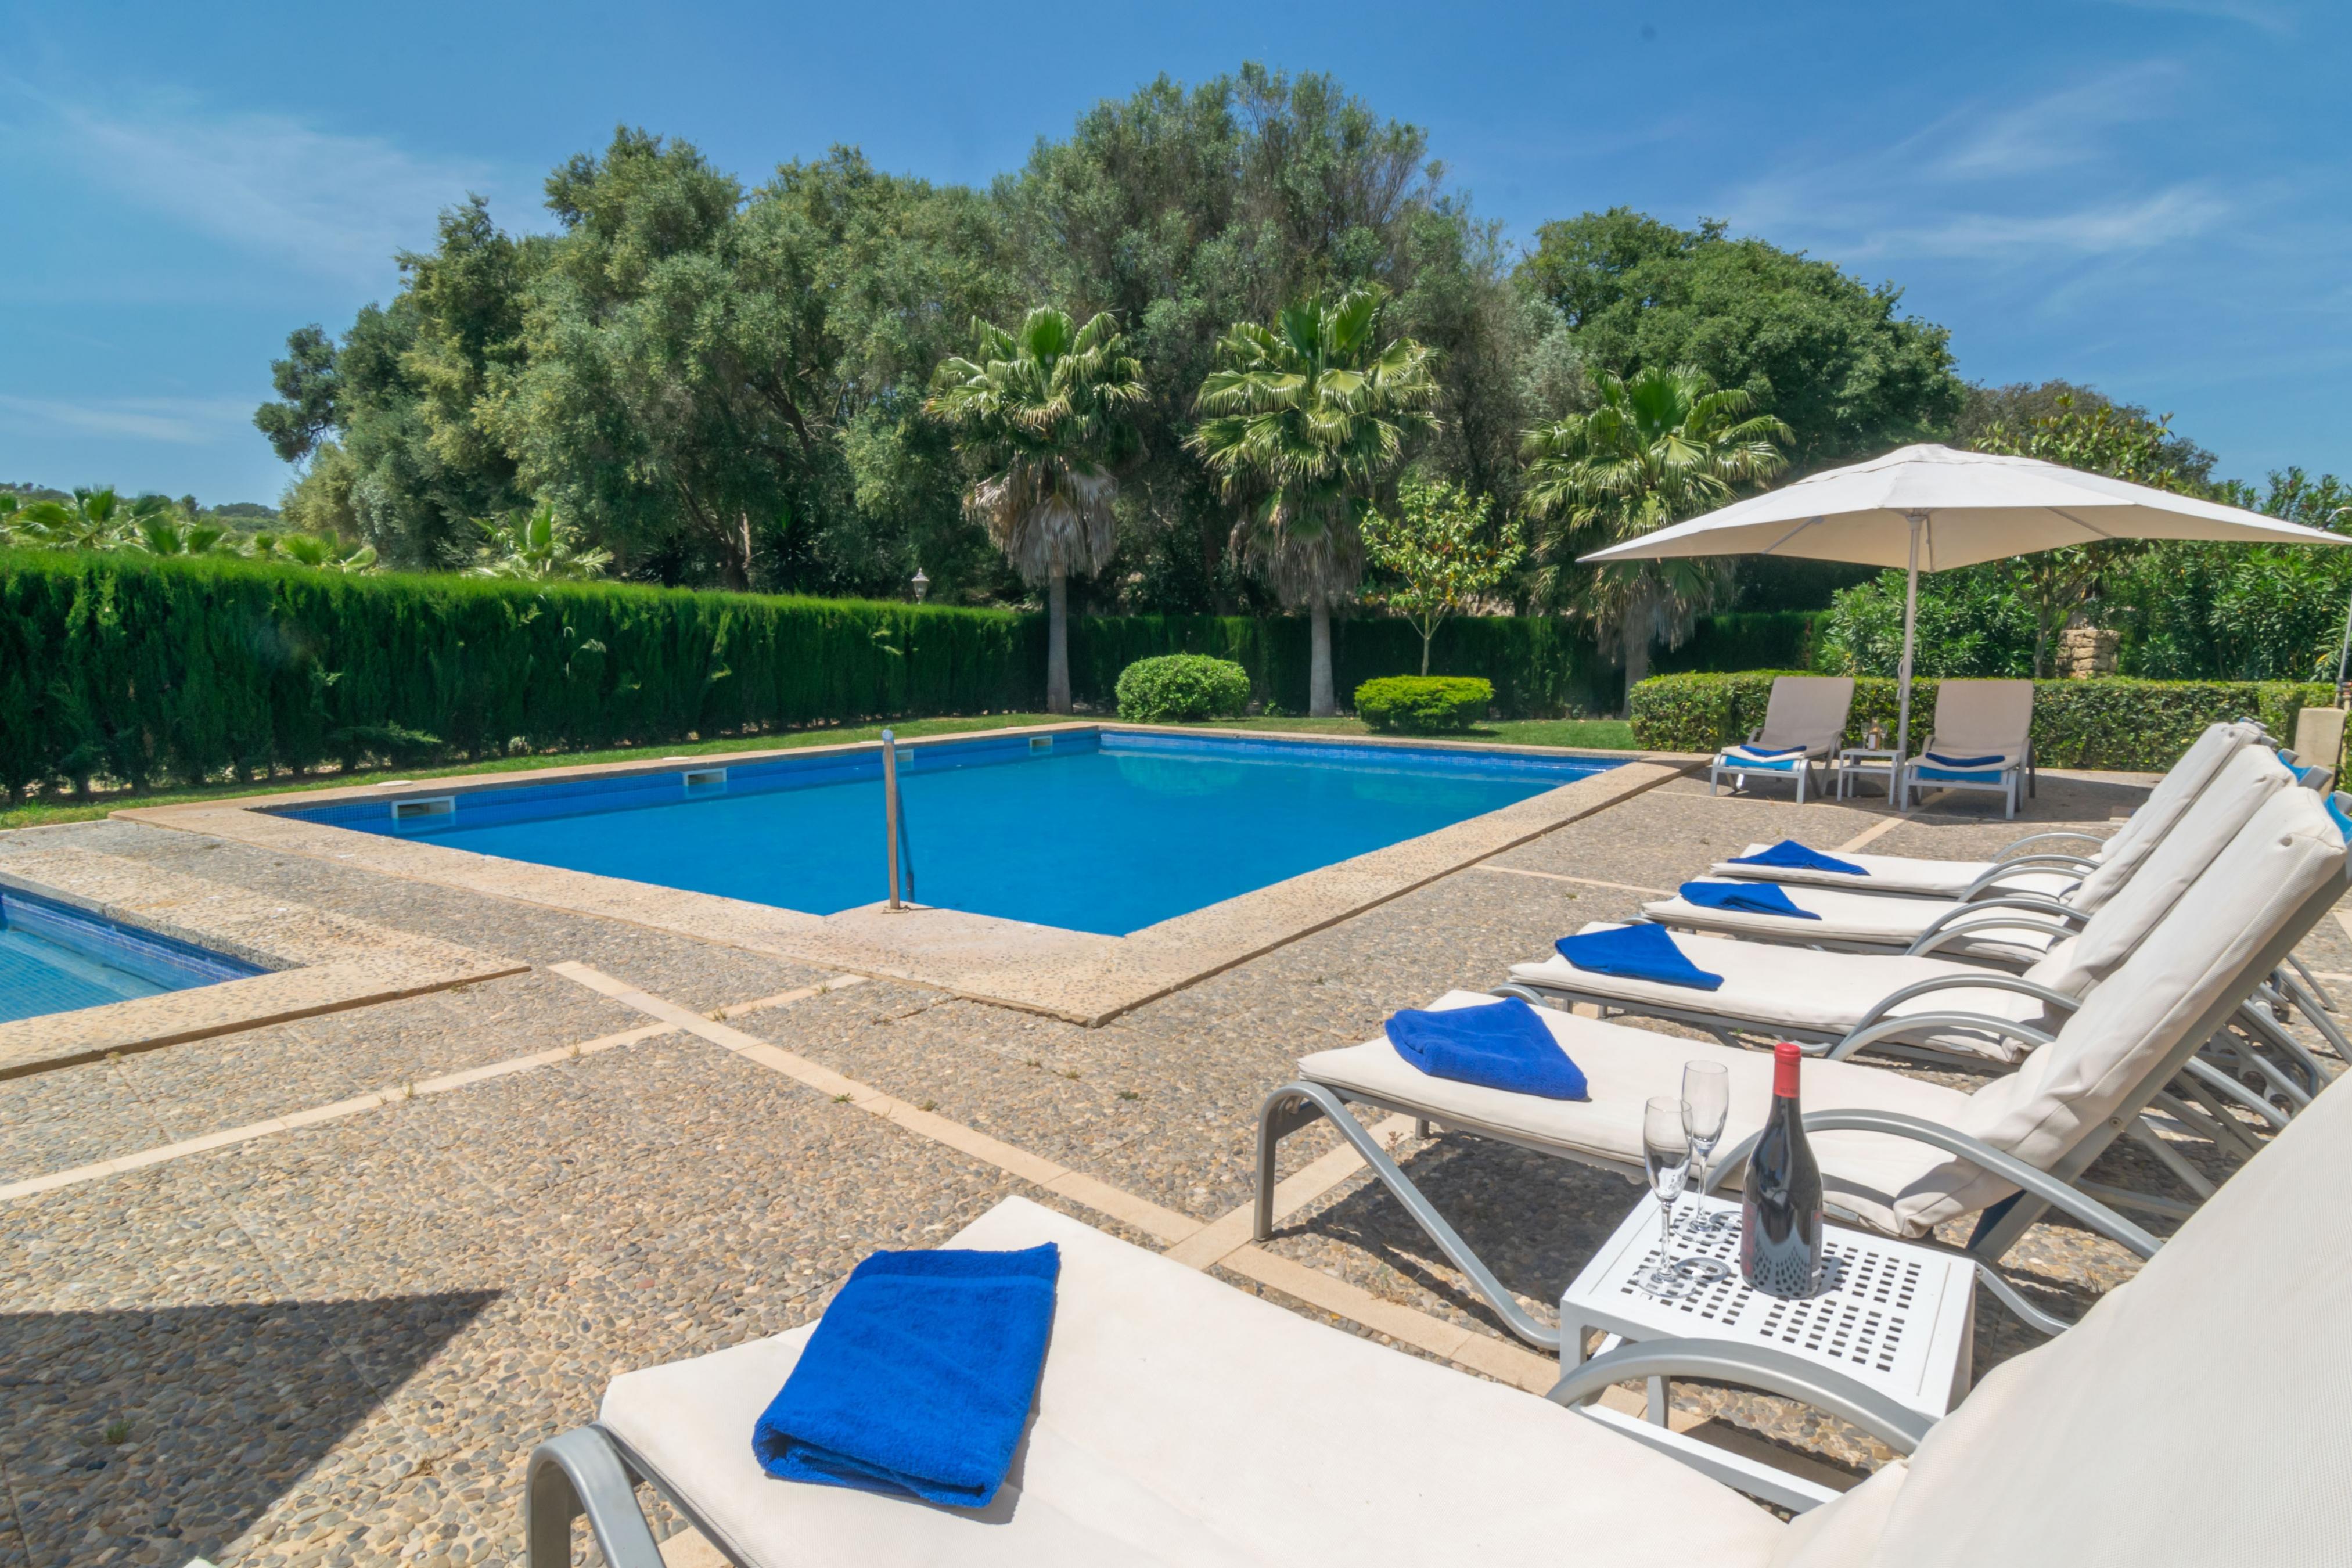 Property Image 2 - EL PALMERAL - Fabulous villa with private pool in the tranquility of the countryside. Free WIFI.